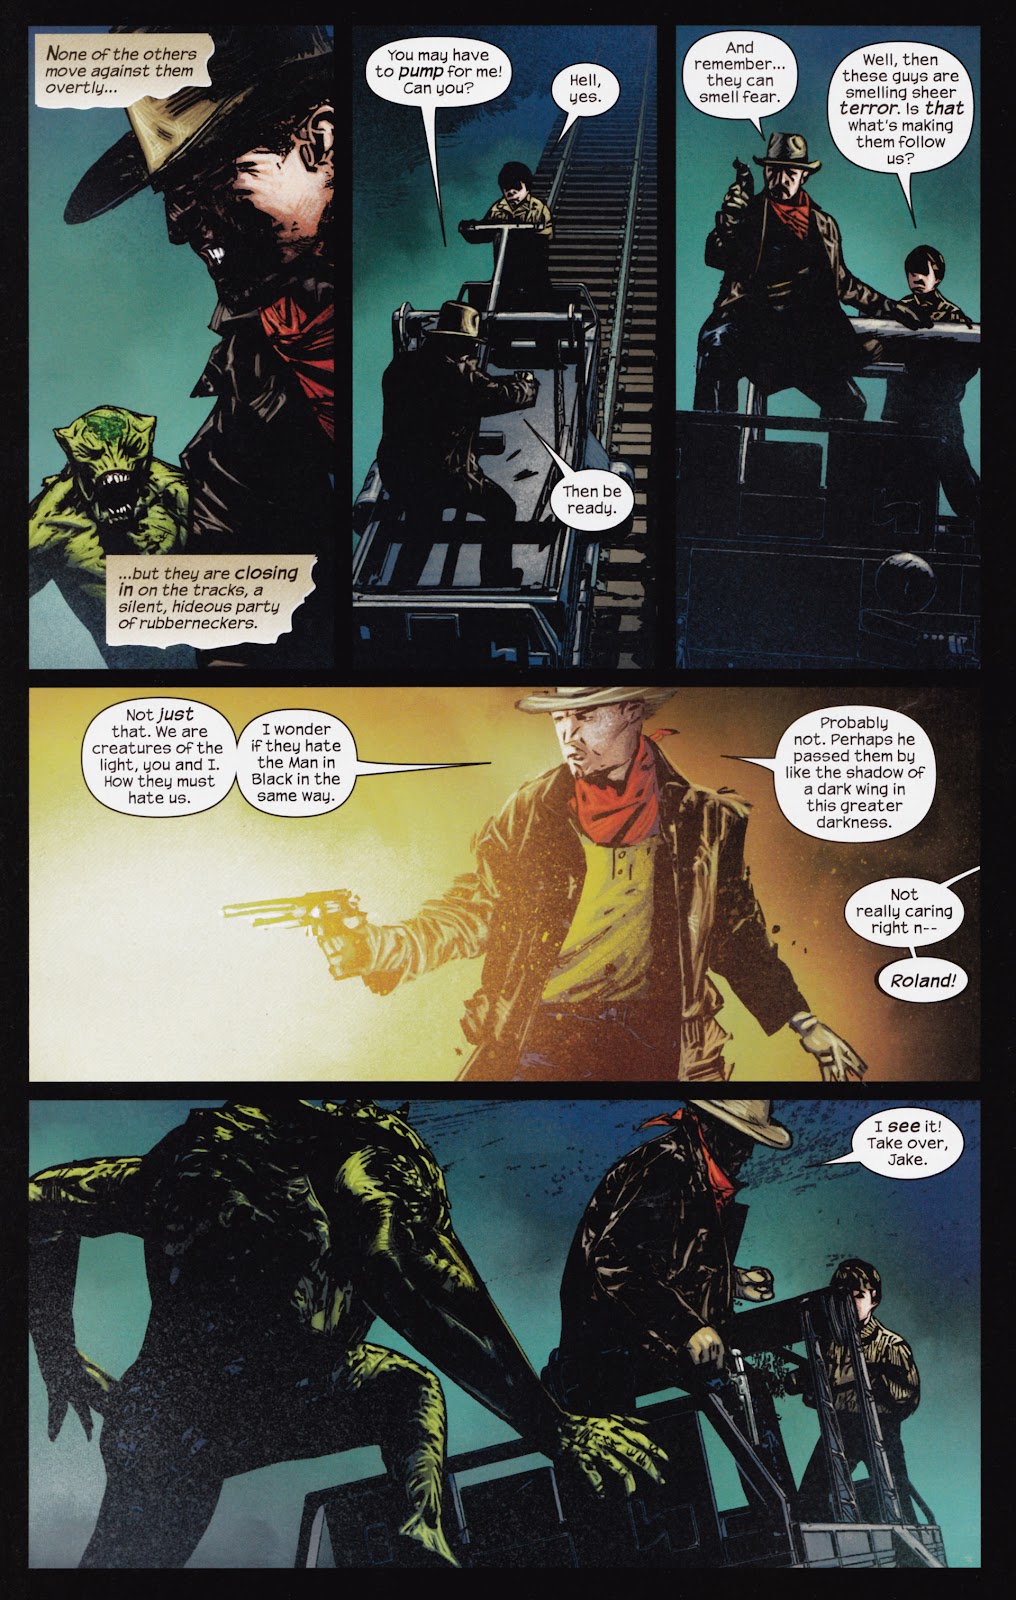 Dark Tower: The Gunslinger - The Man in Black issue 3 - Page 4